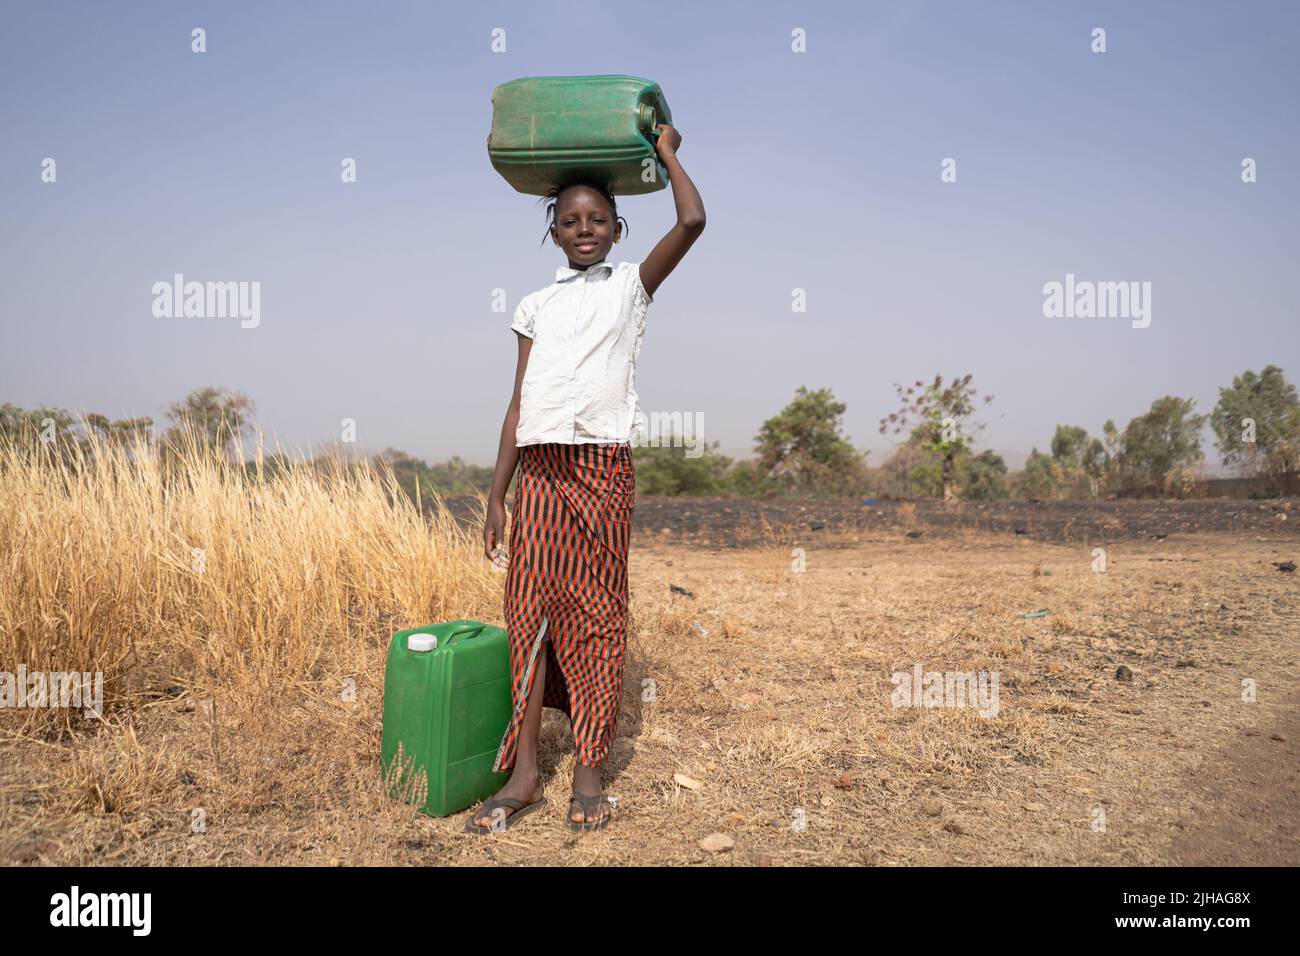 African girl with green canisters in a savanna landscape, symbolising lack of water infrastructure in developing countries Stock Photo